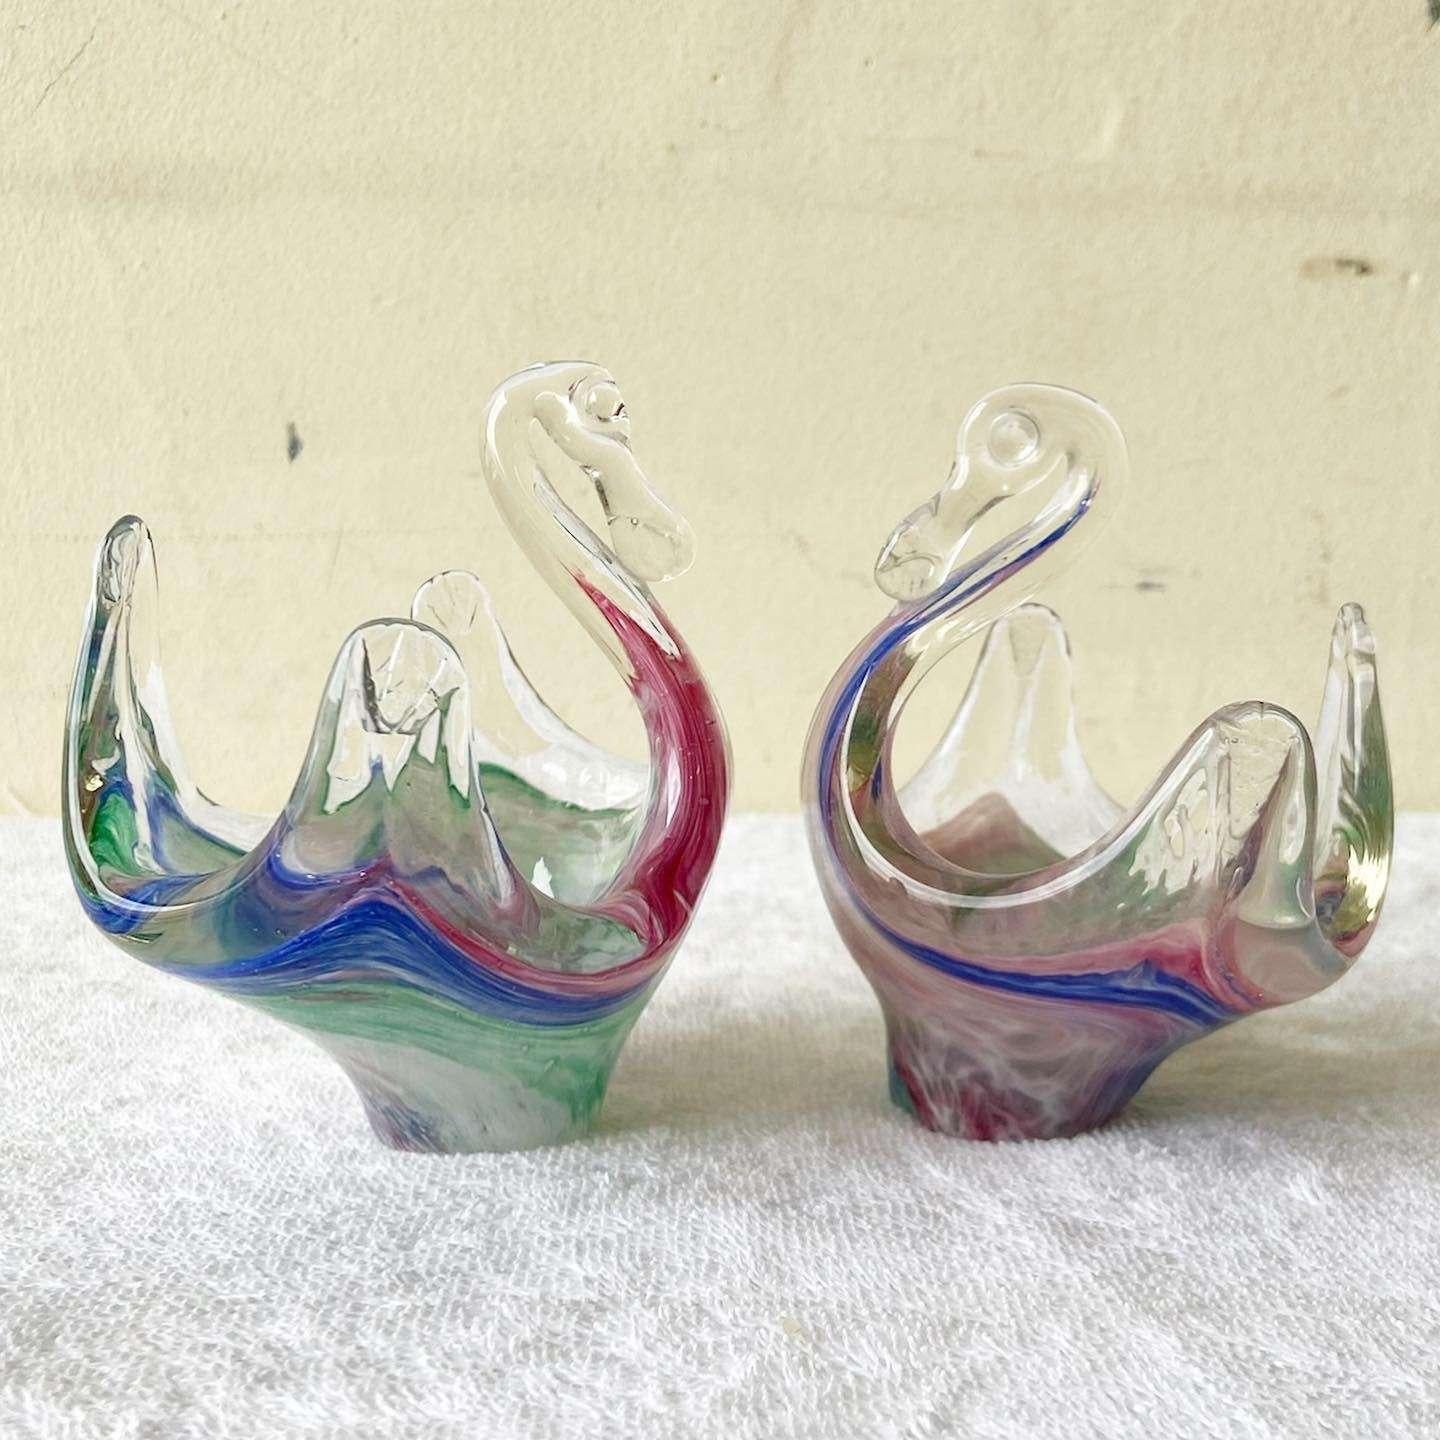 Postmodern Glass Swan Decorative Candy Dishes - a Pair For Sale 1